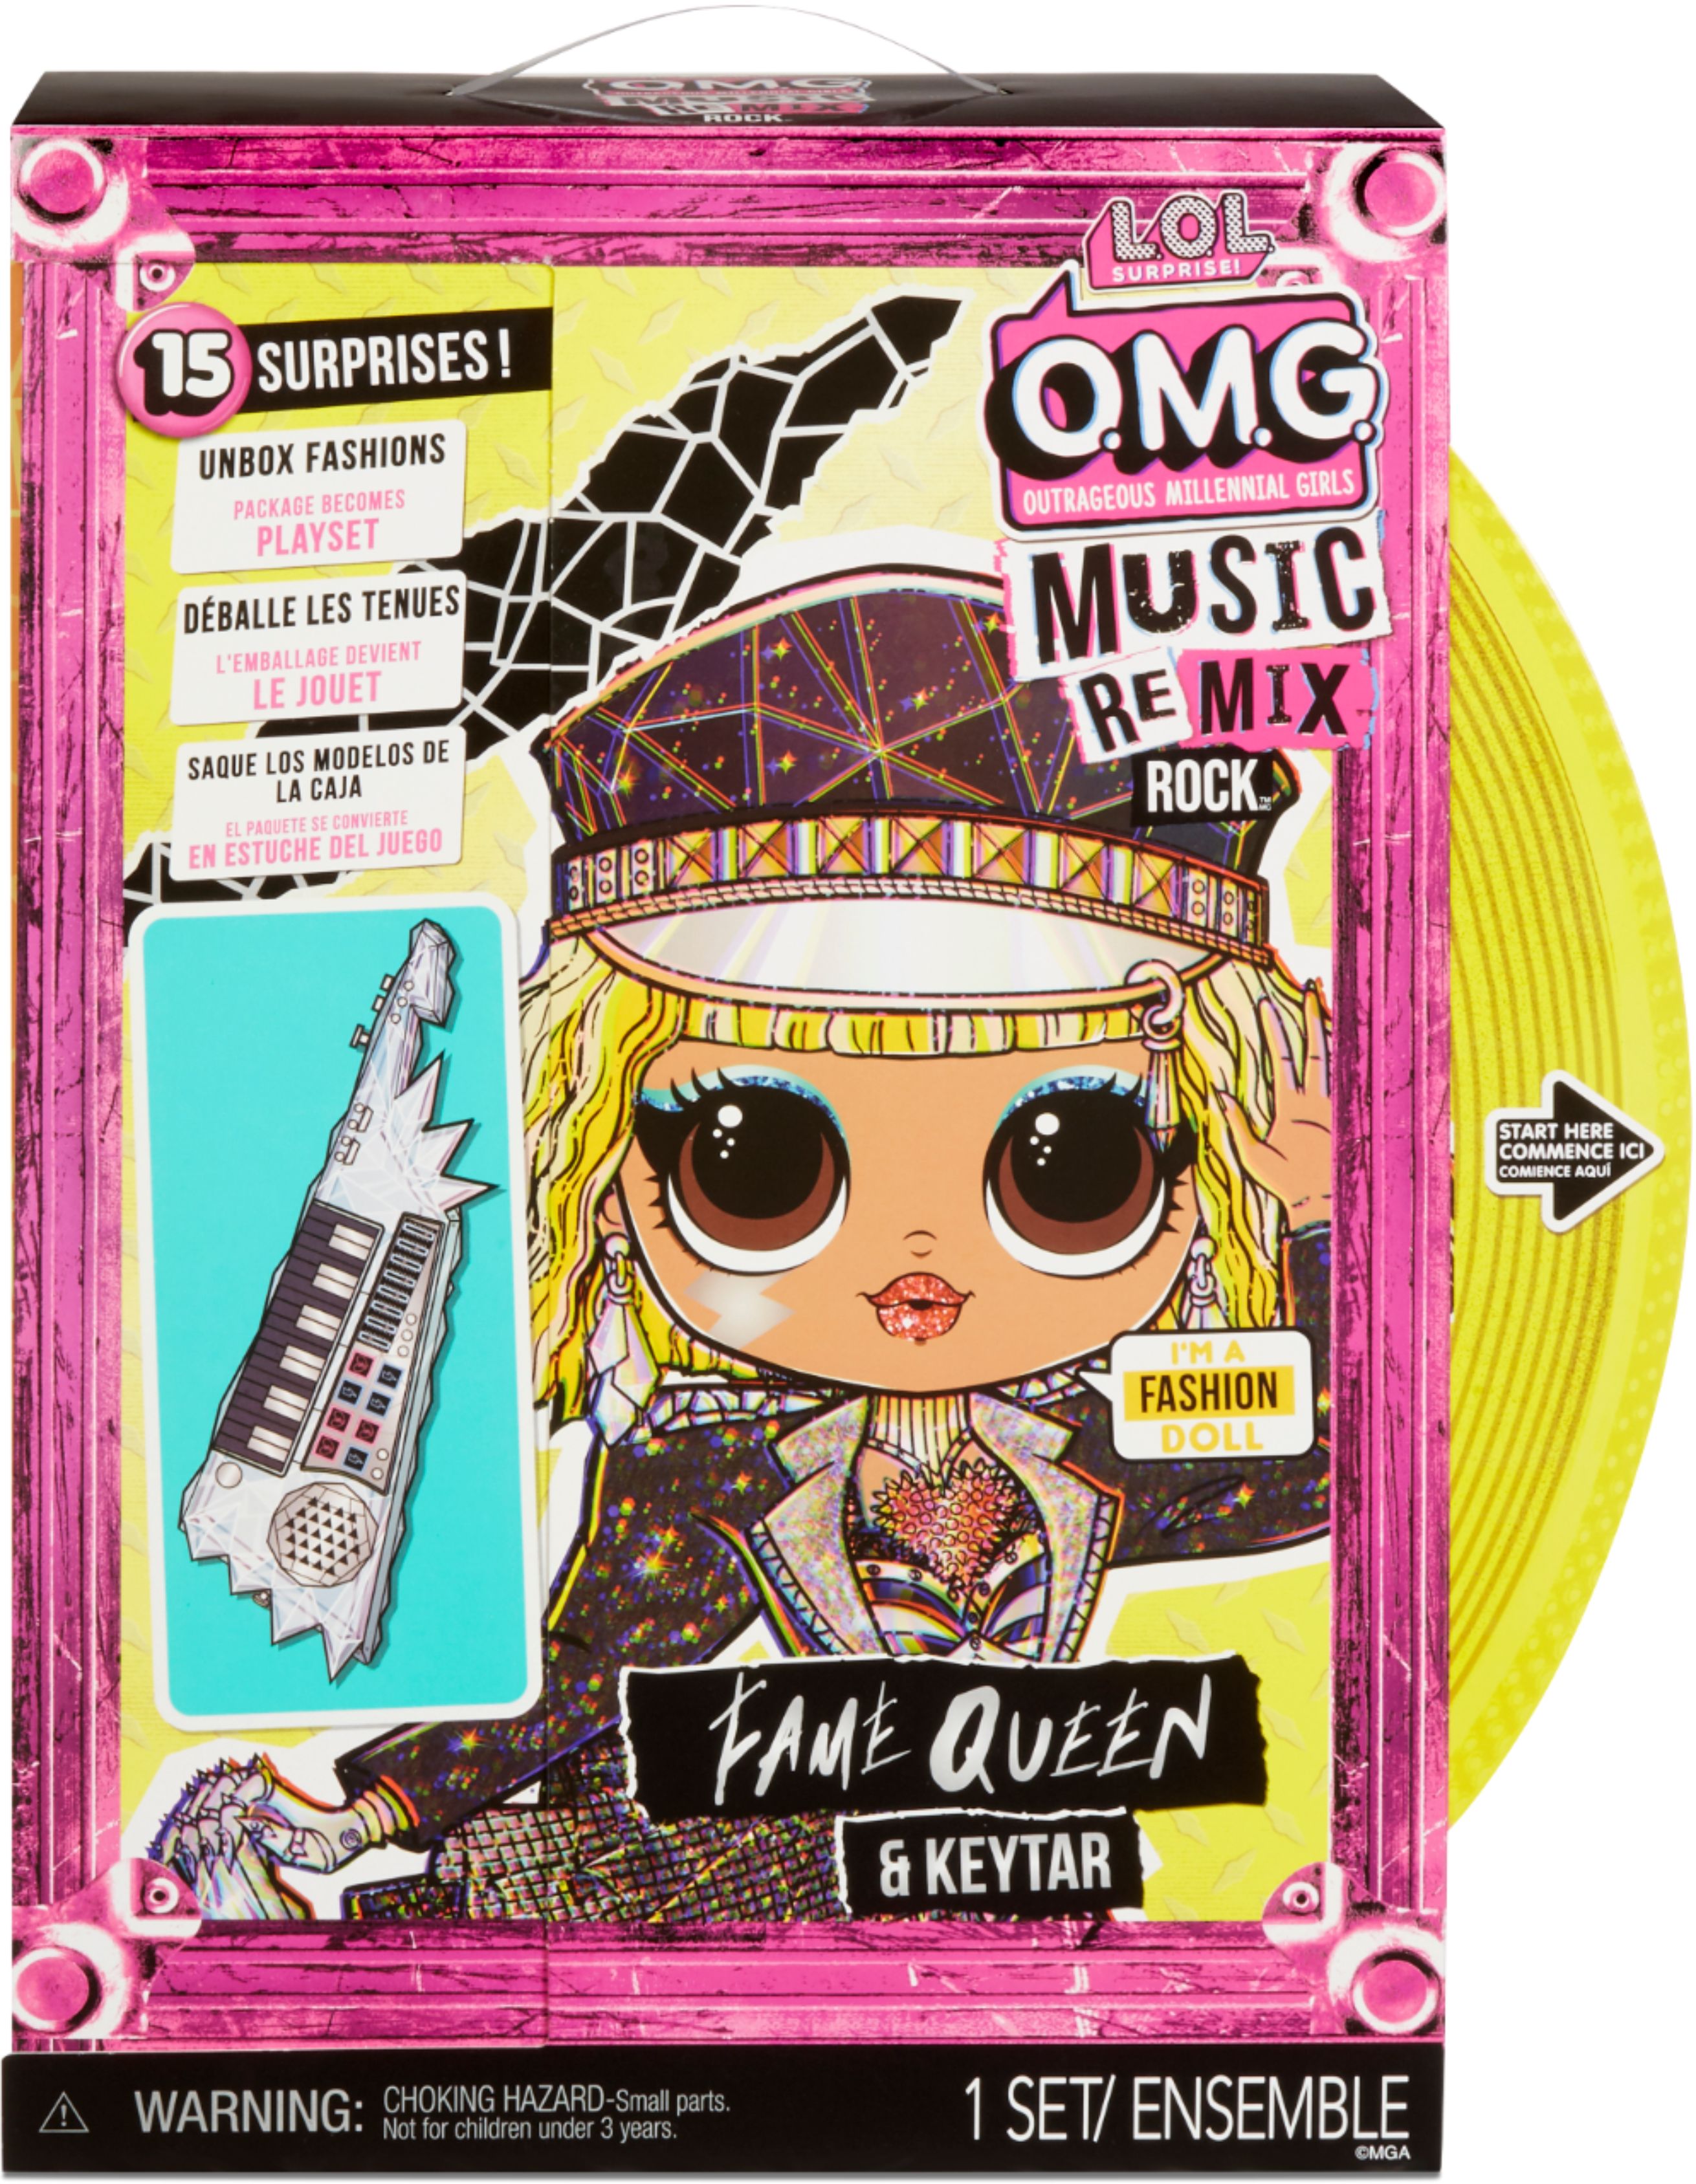 Angle View: L.O.L. Surprise! - OMG Remix Rock-  Fame Queen and Keytar